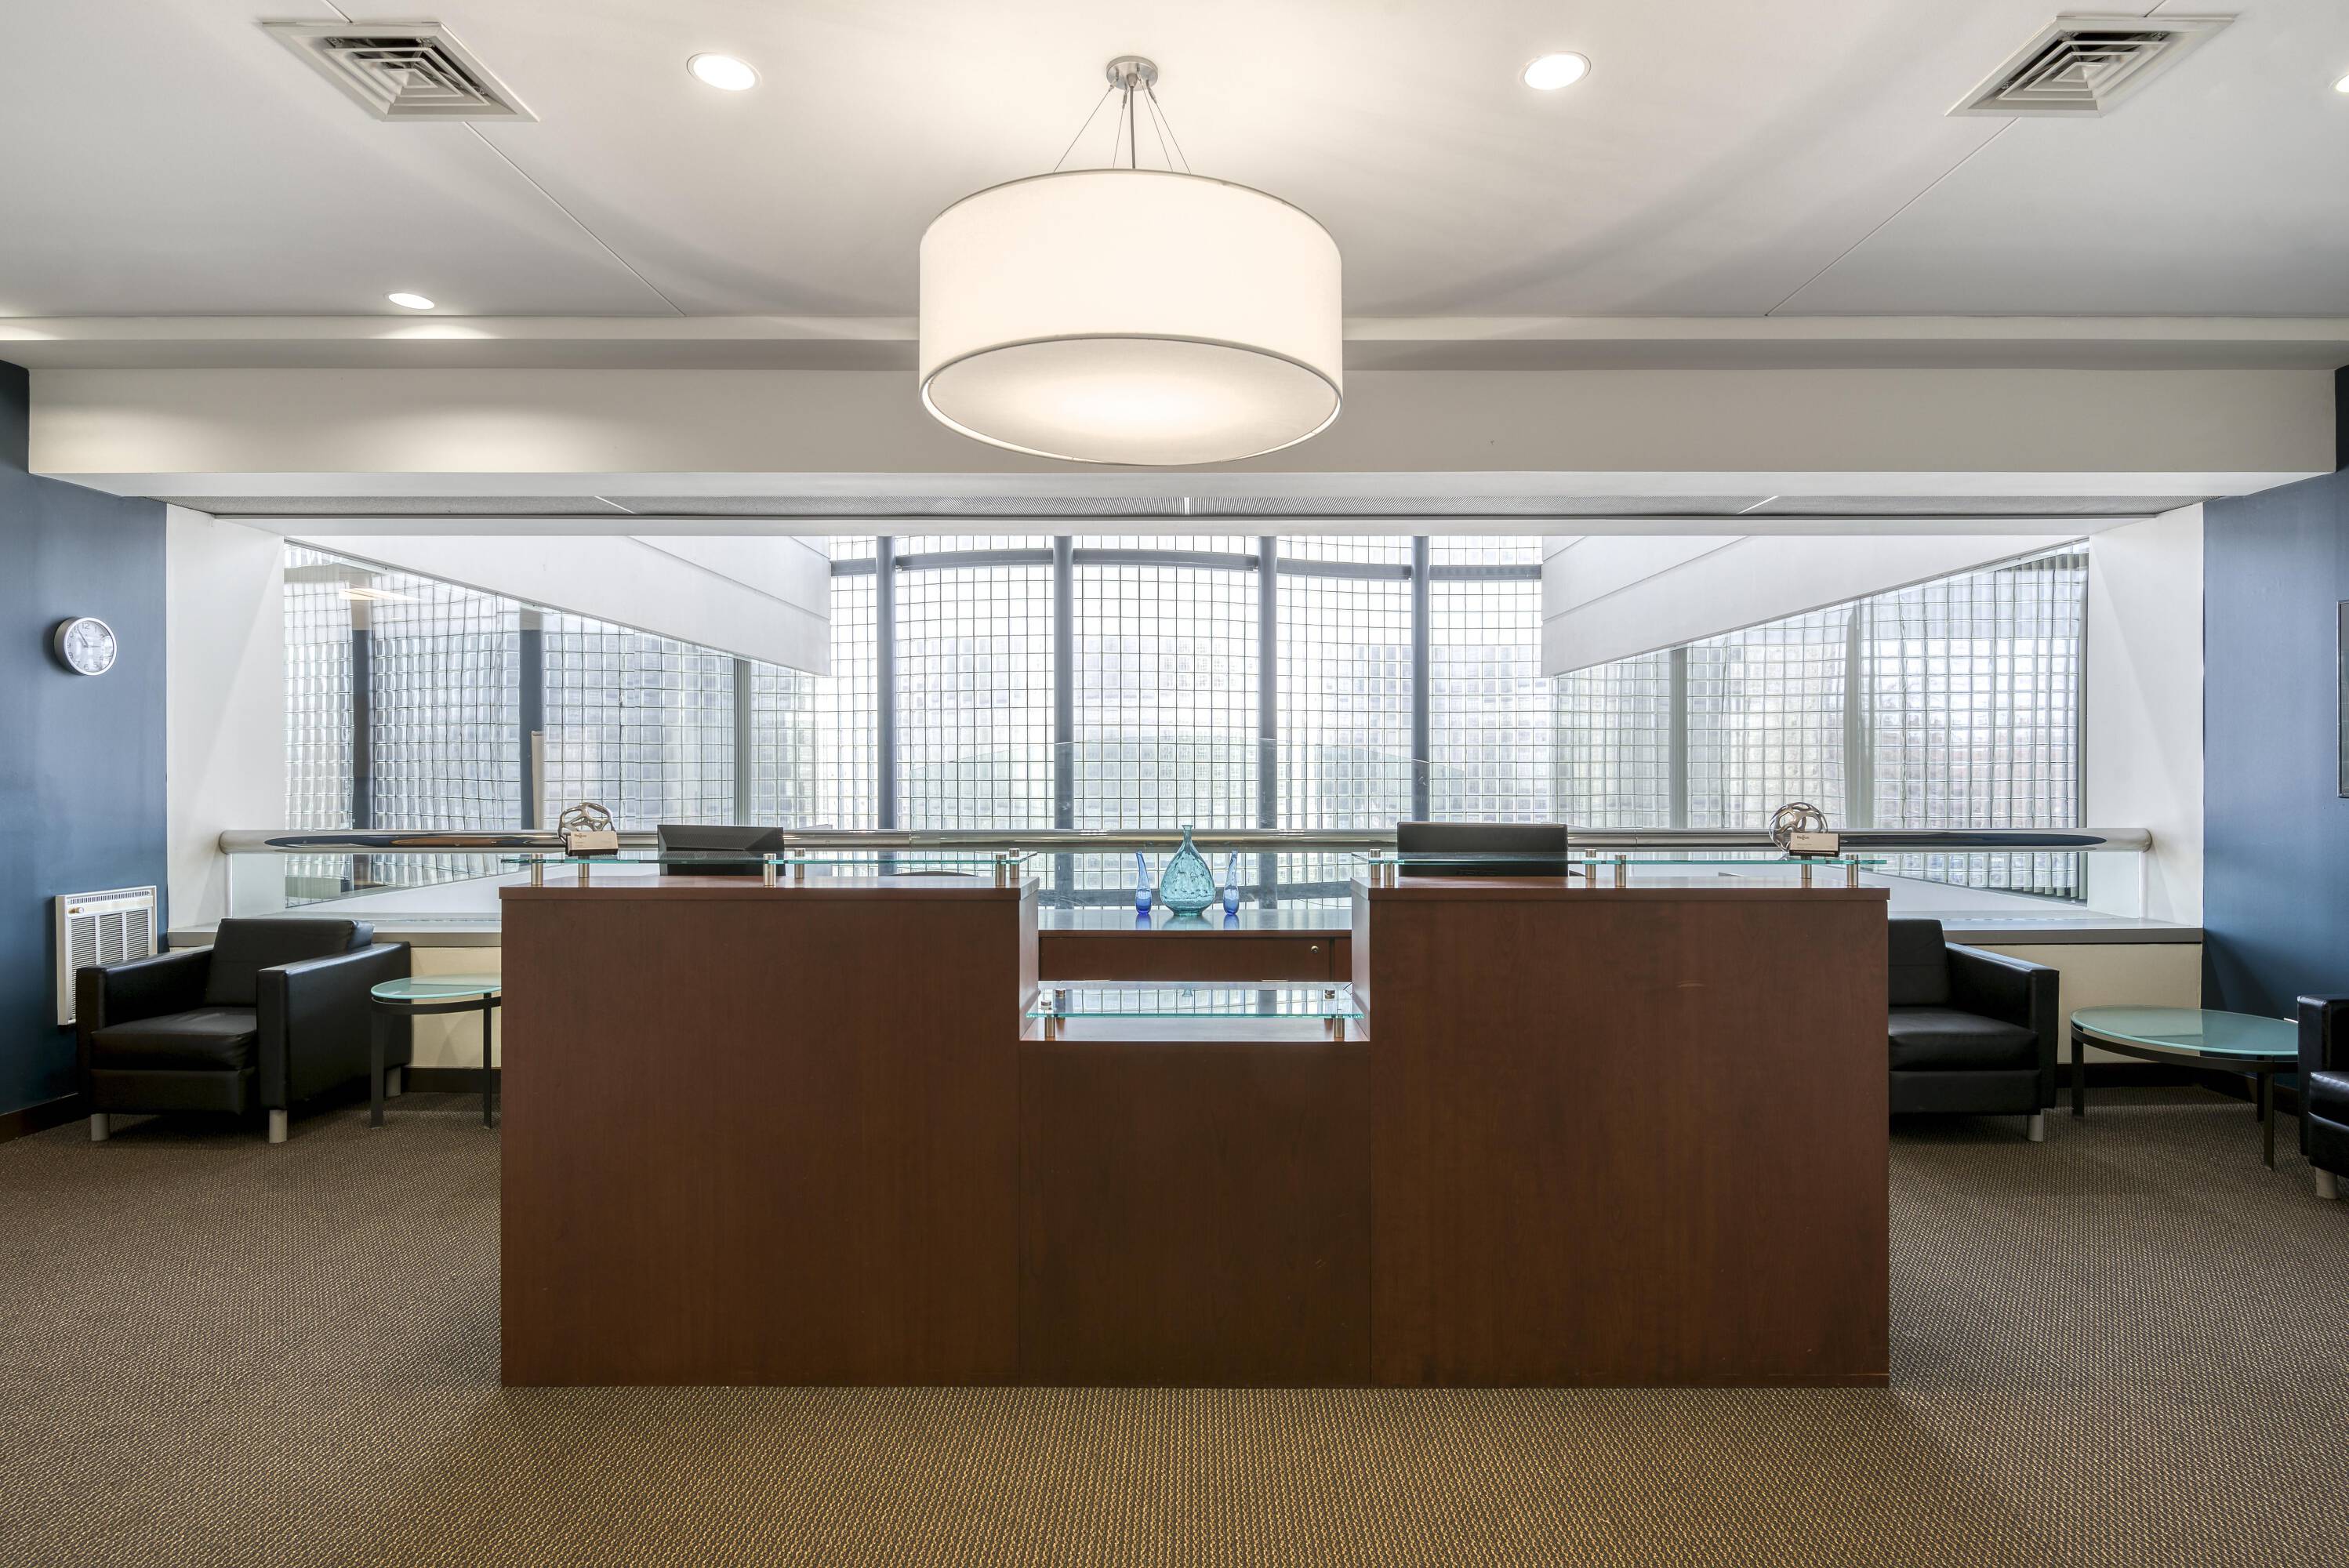 Office Space, Meeting Rooms & Virtual Services in Troy, Michigan